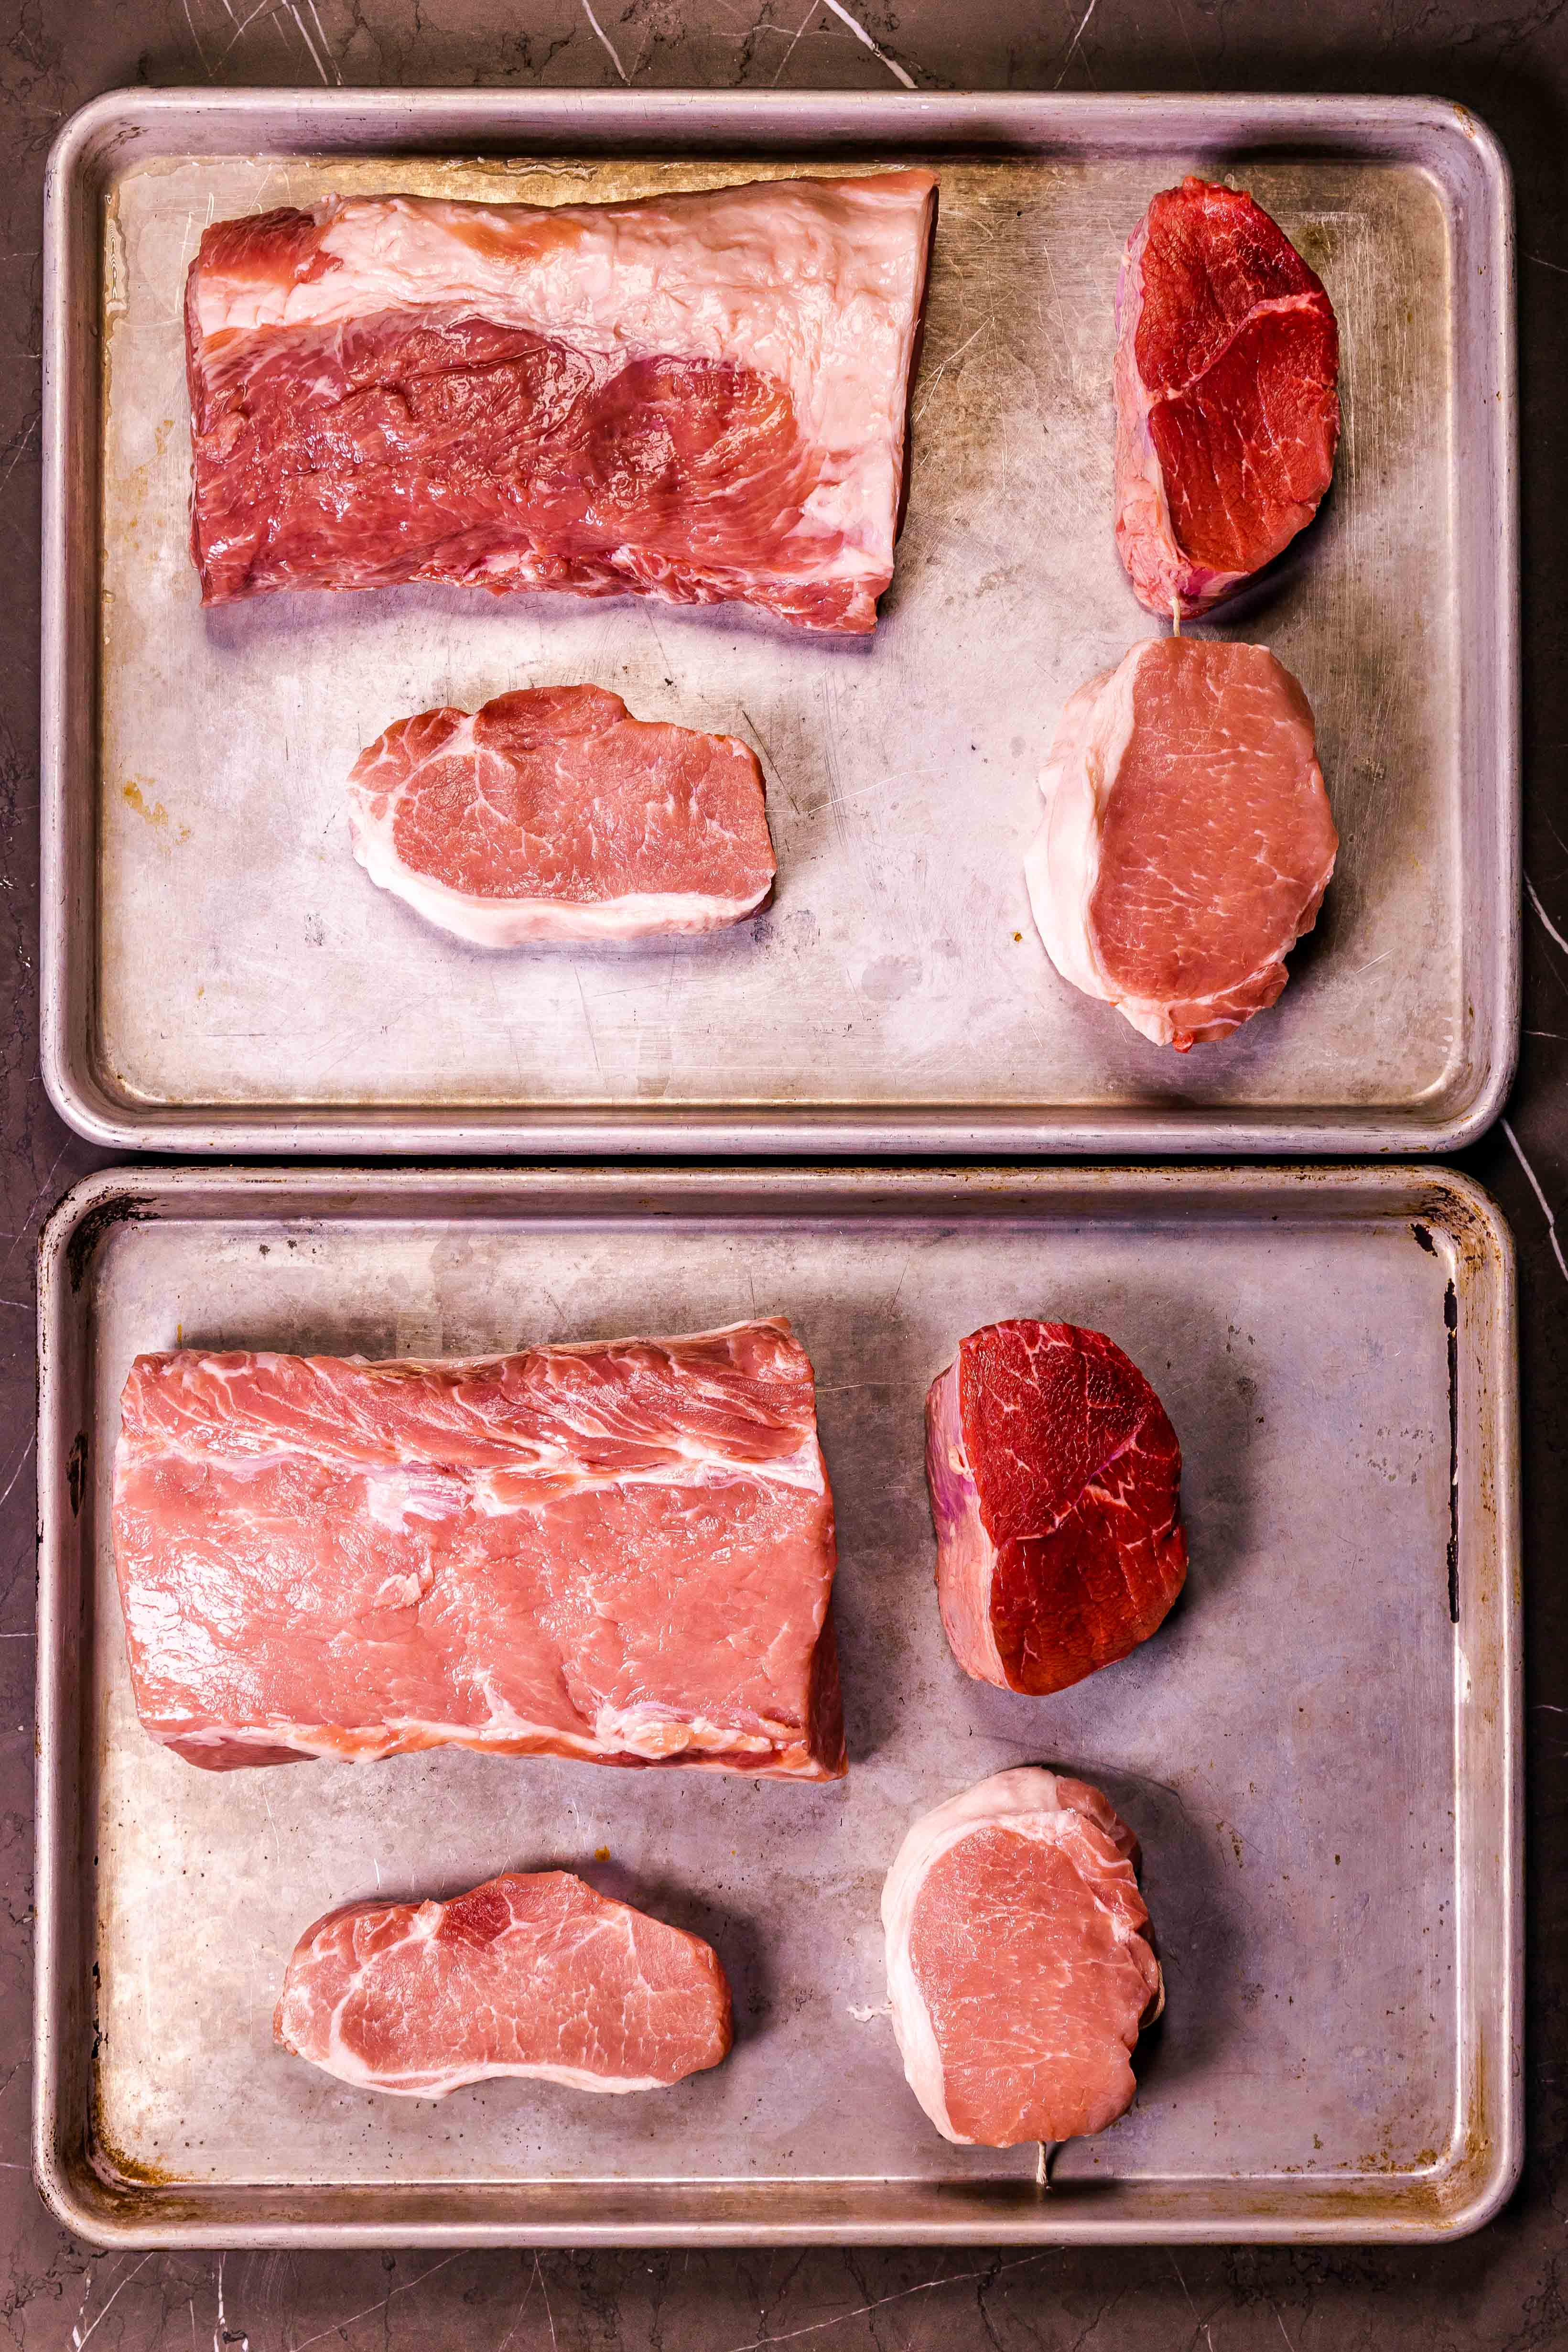 Cooking Meat: Is It Done Yet?